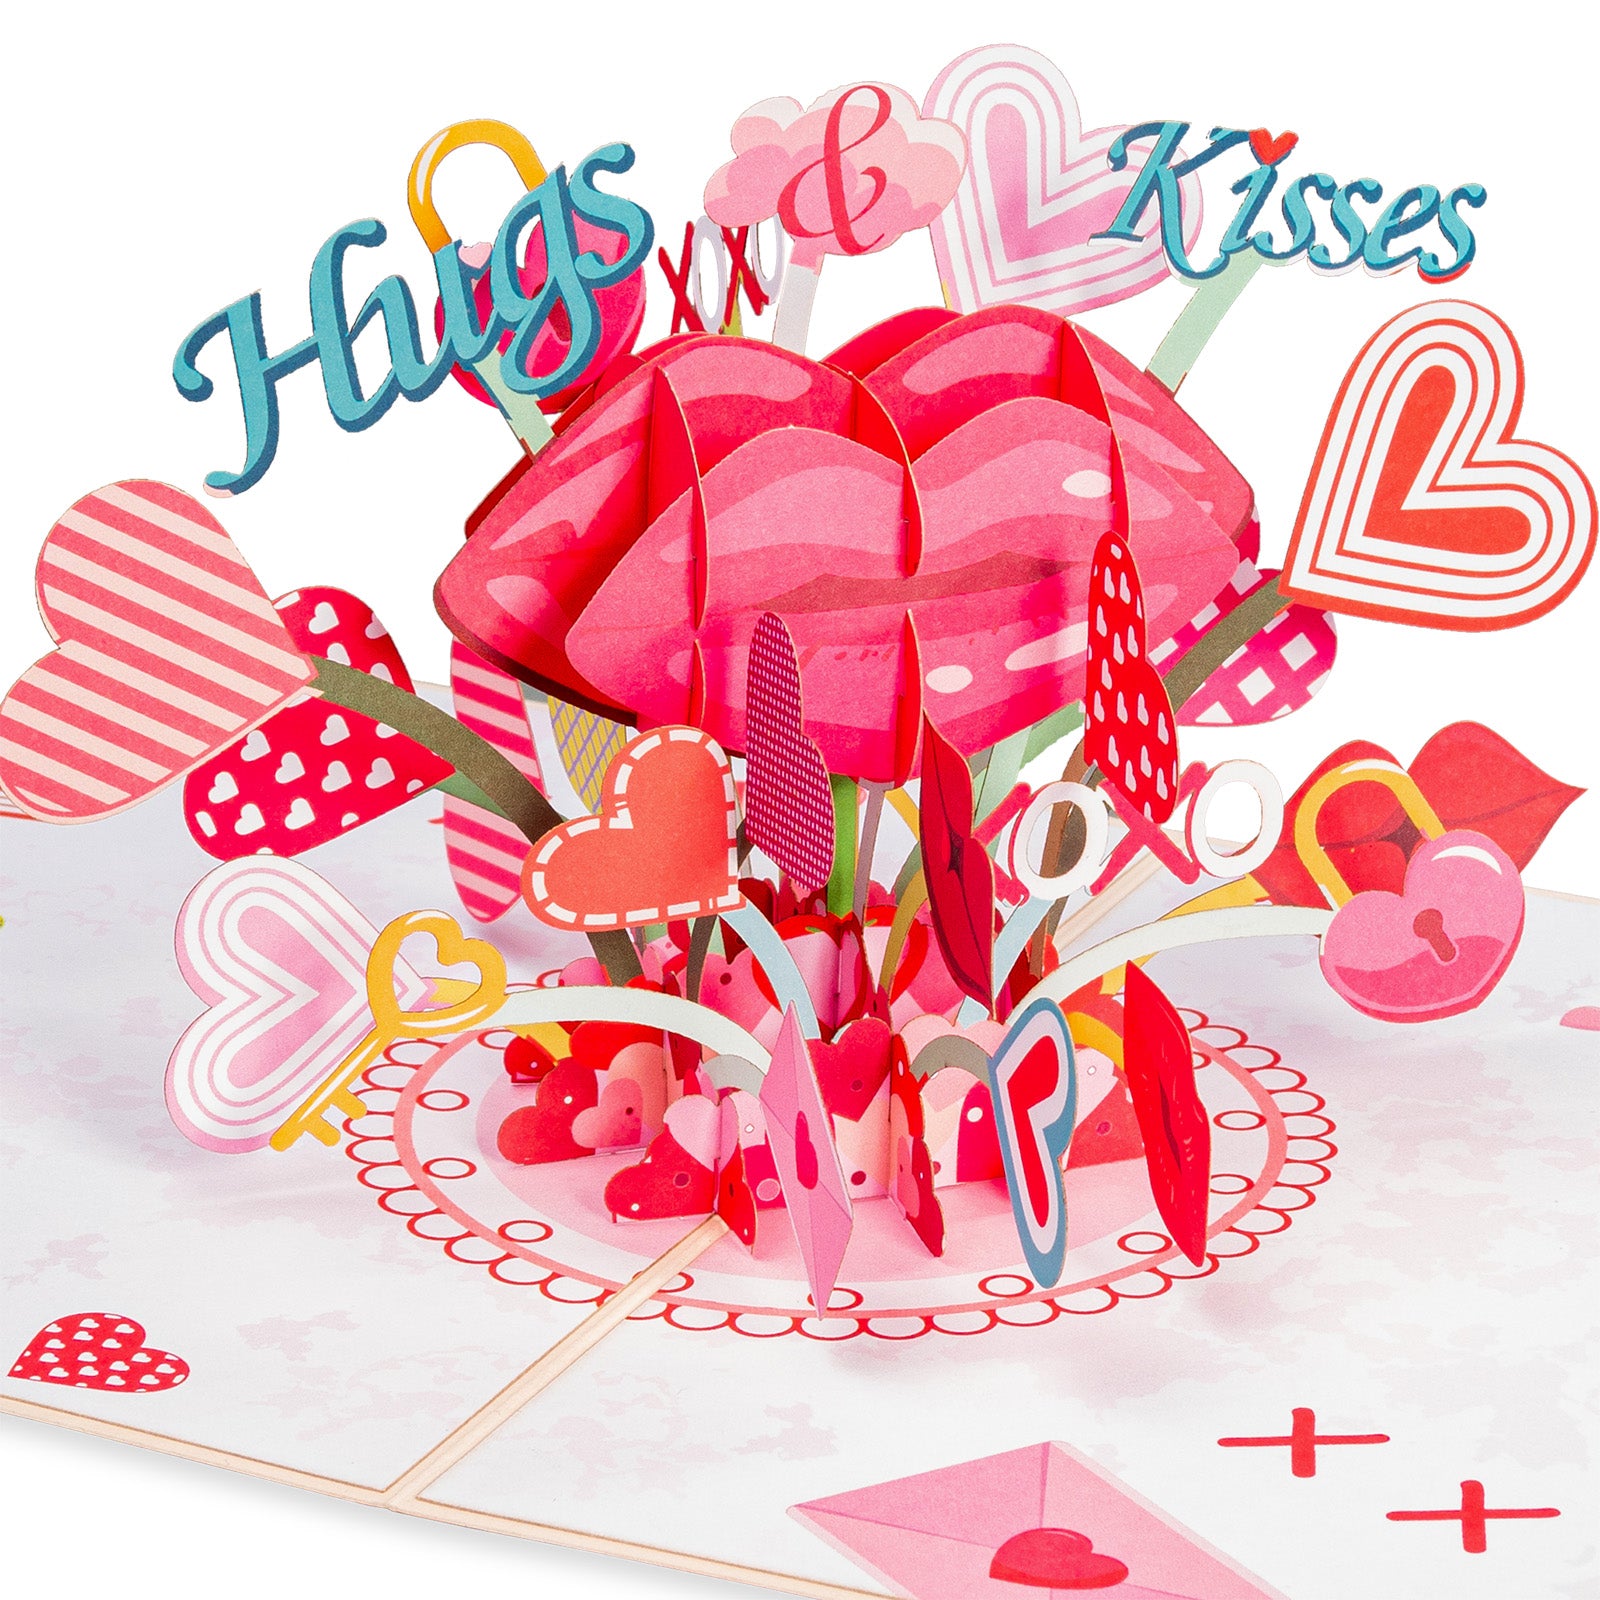 Xoxo-hugs and Kisses-paws-paint Brush Studios-valentines Day-paws